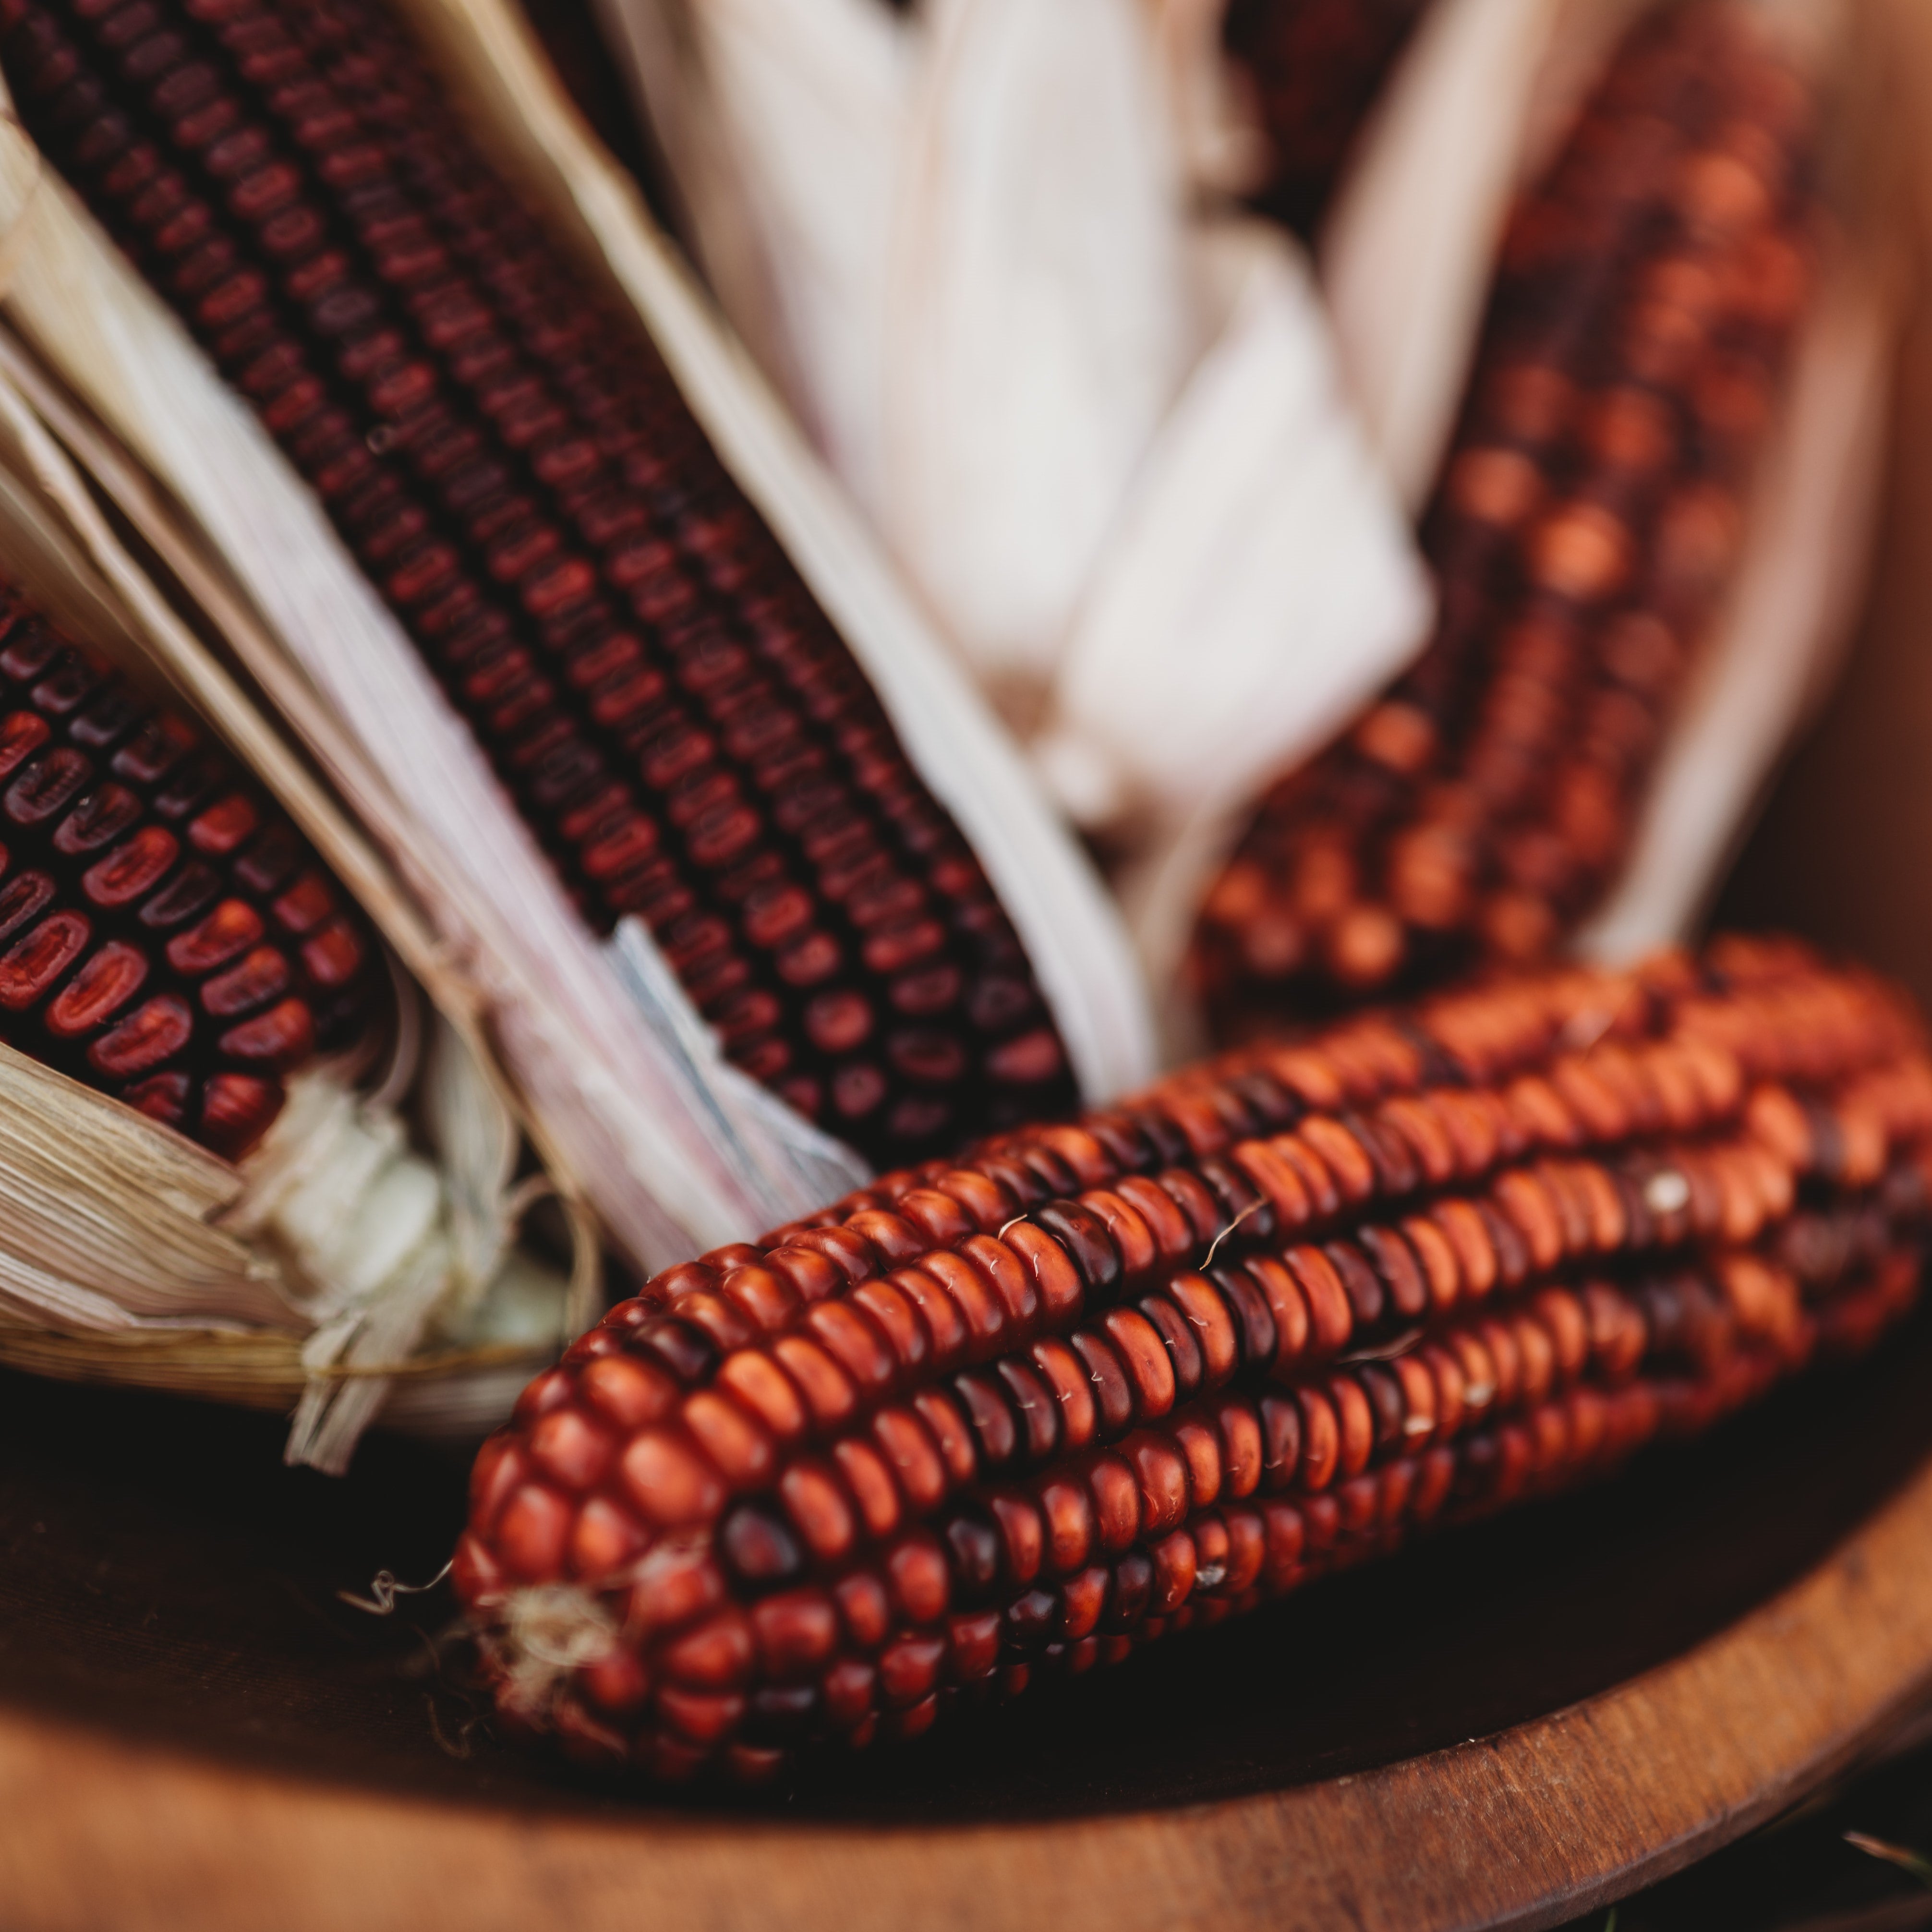 Heirloom and Open-Pollinated Sweet Corn